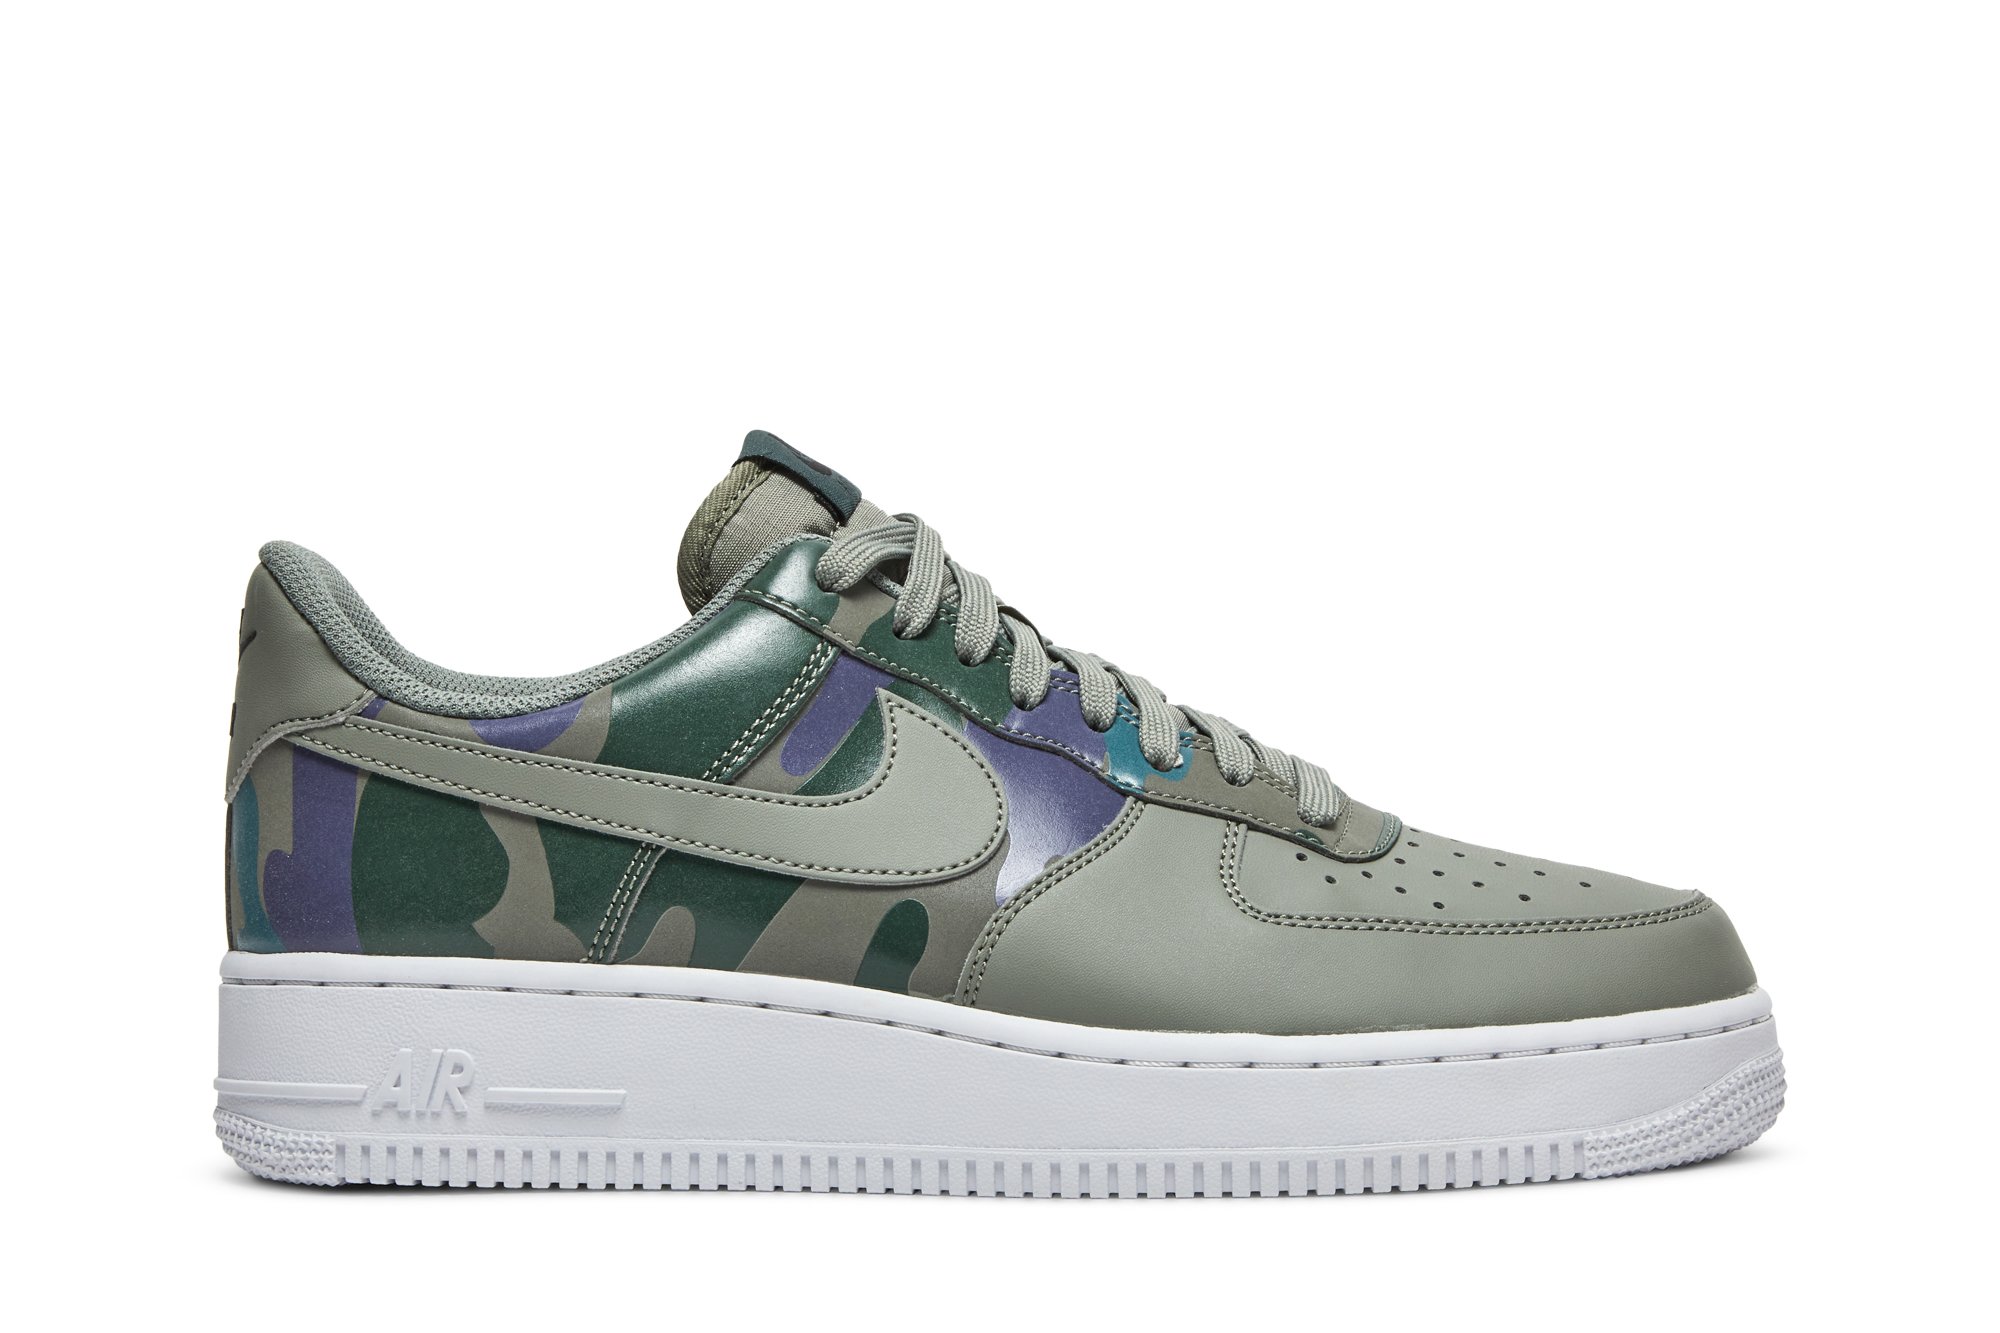 Buy Air Force 1 '07 LV8 'Country Camo' - 823511 008 | GOAT